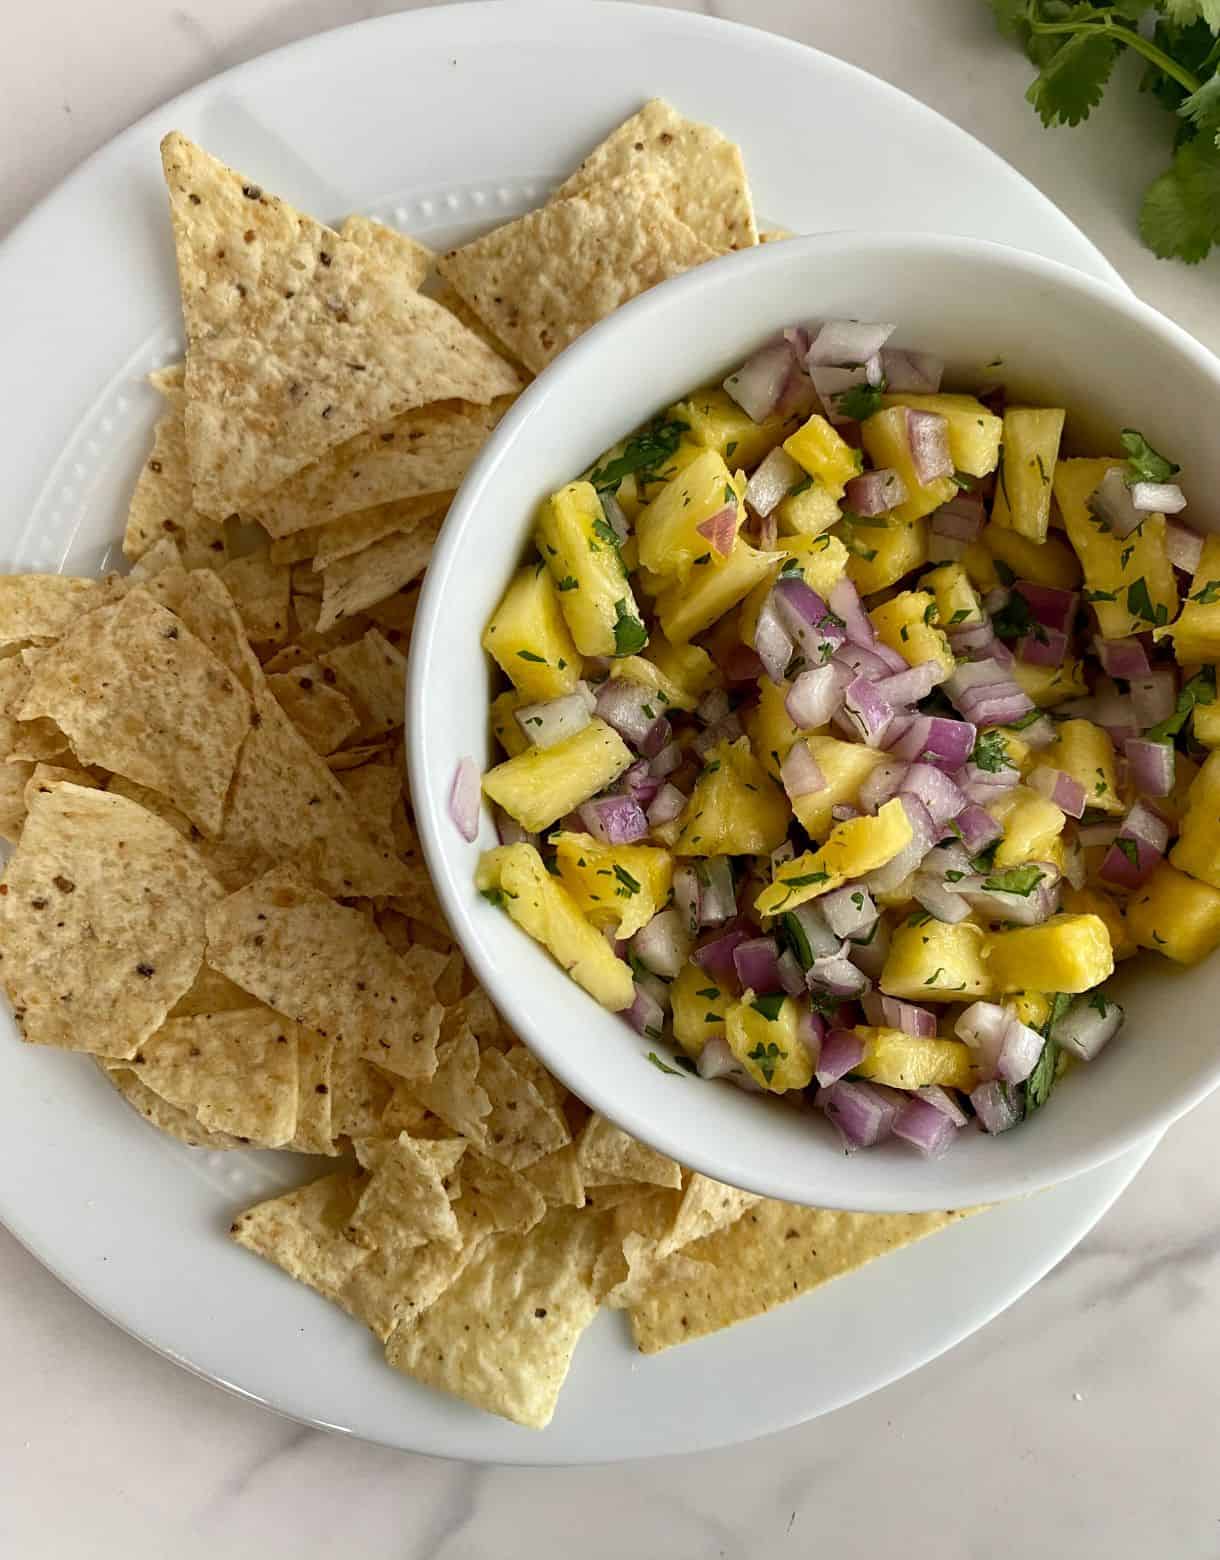 A bowl of Pineapple Pico de Gallo on a plate full of tortilla chips.